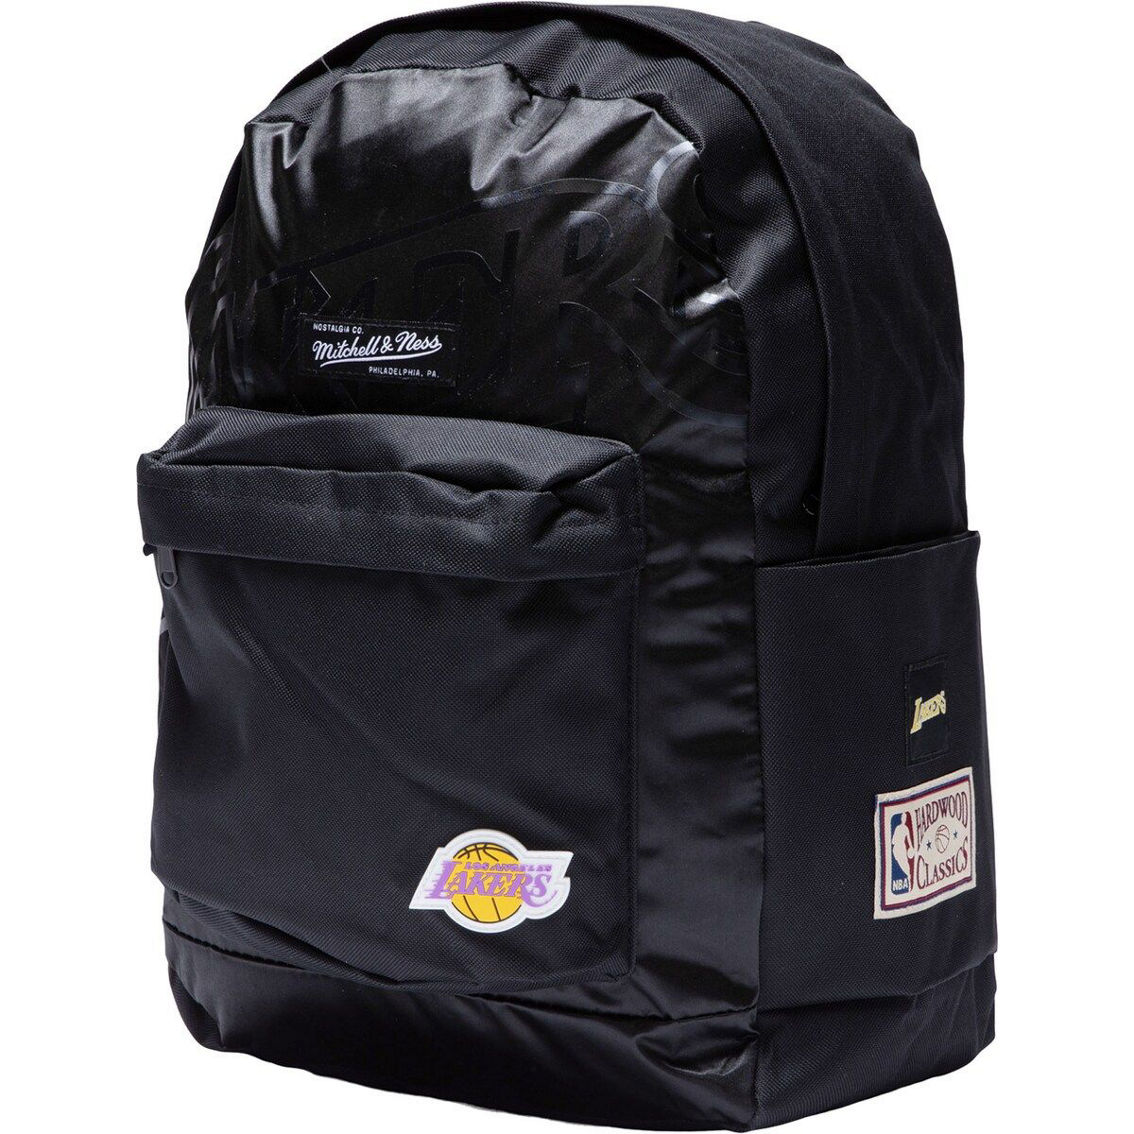 Mitchell & Ness Black Los Angeles Lakers Team Backpack - Image 2 of 3